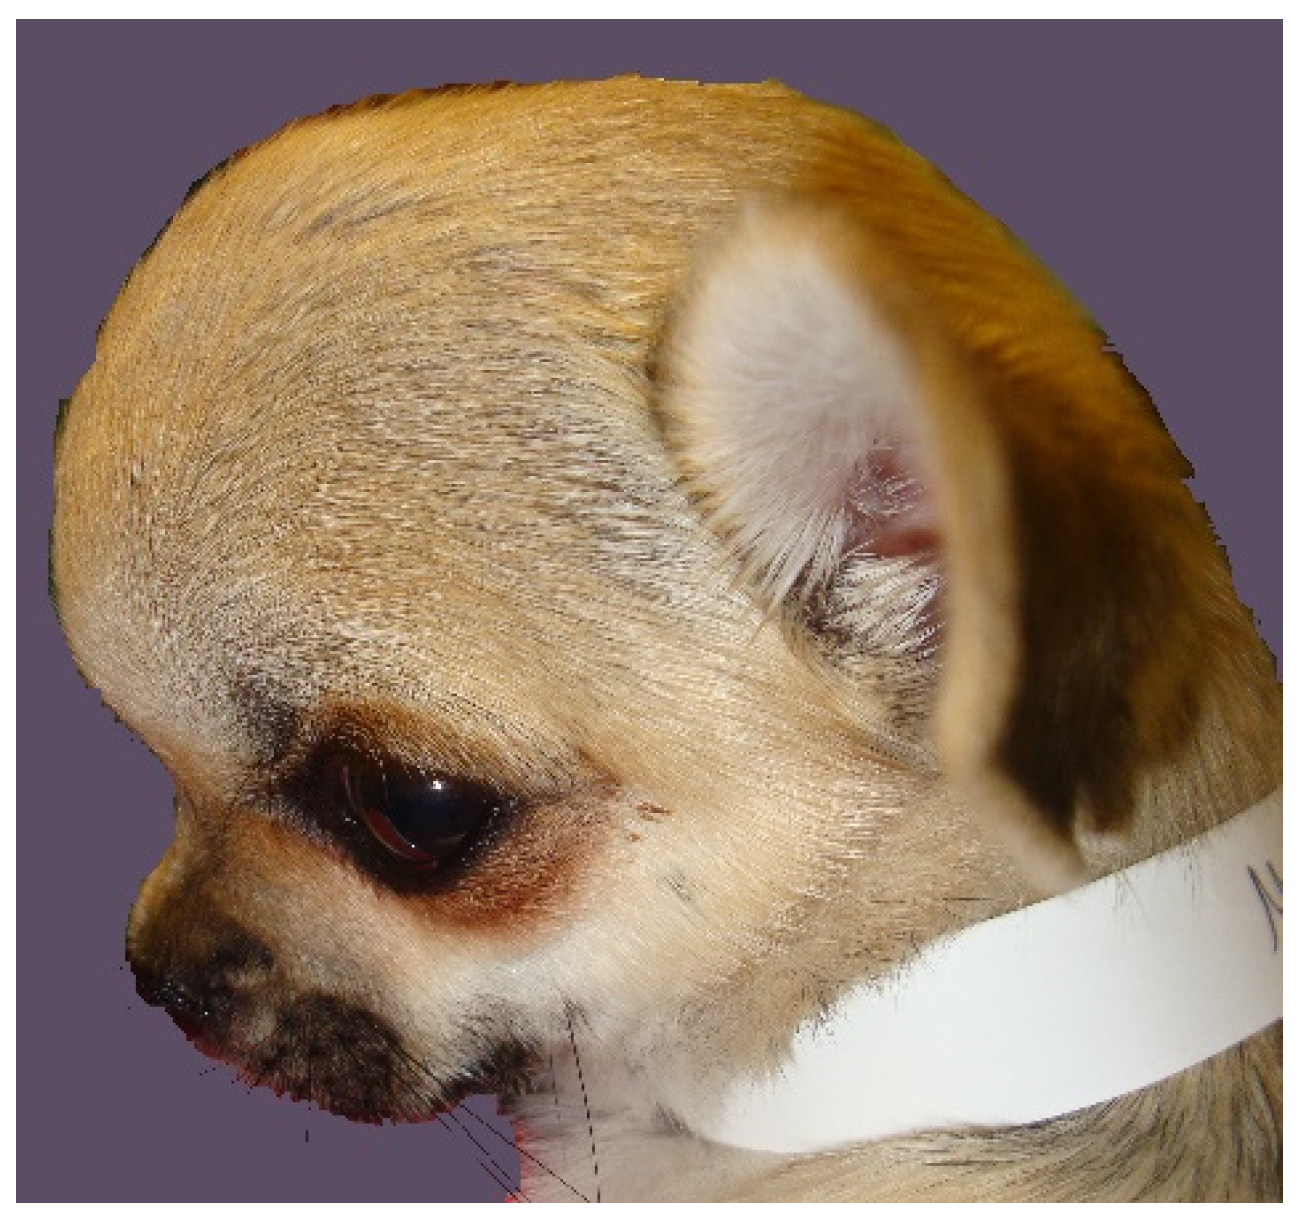 Life | Free Full-Text | The Need for Head Space: Brachycephaly and  Cerebrospinal Fluid Disorders